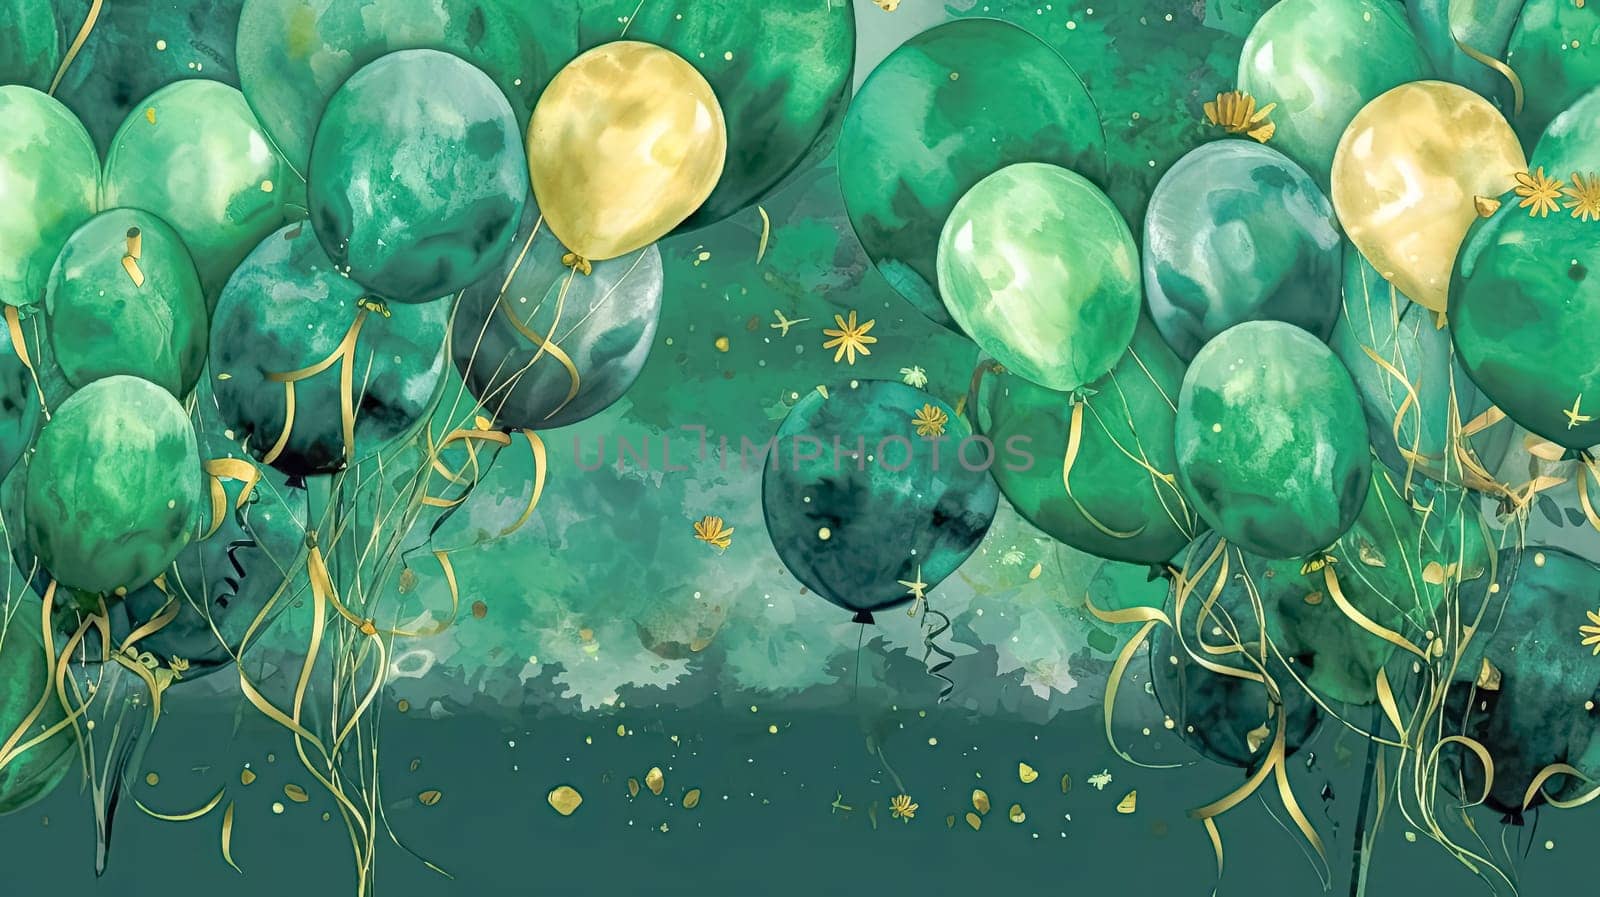 Golden Gleam, Watercolor illustration of a green and gold balloon, a shining accent for St. Patricks Day festivities